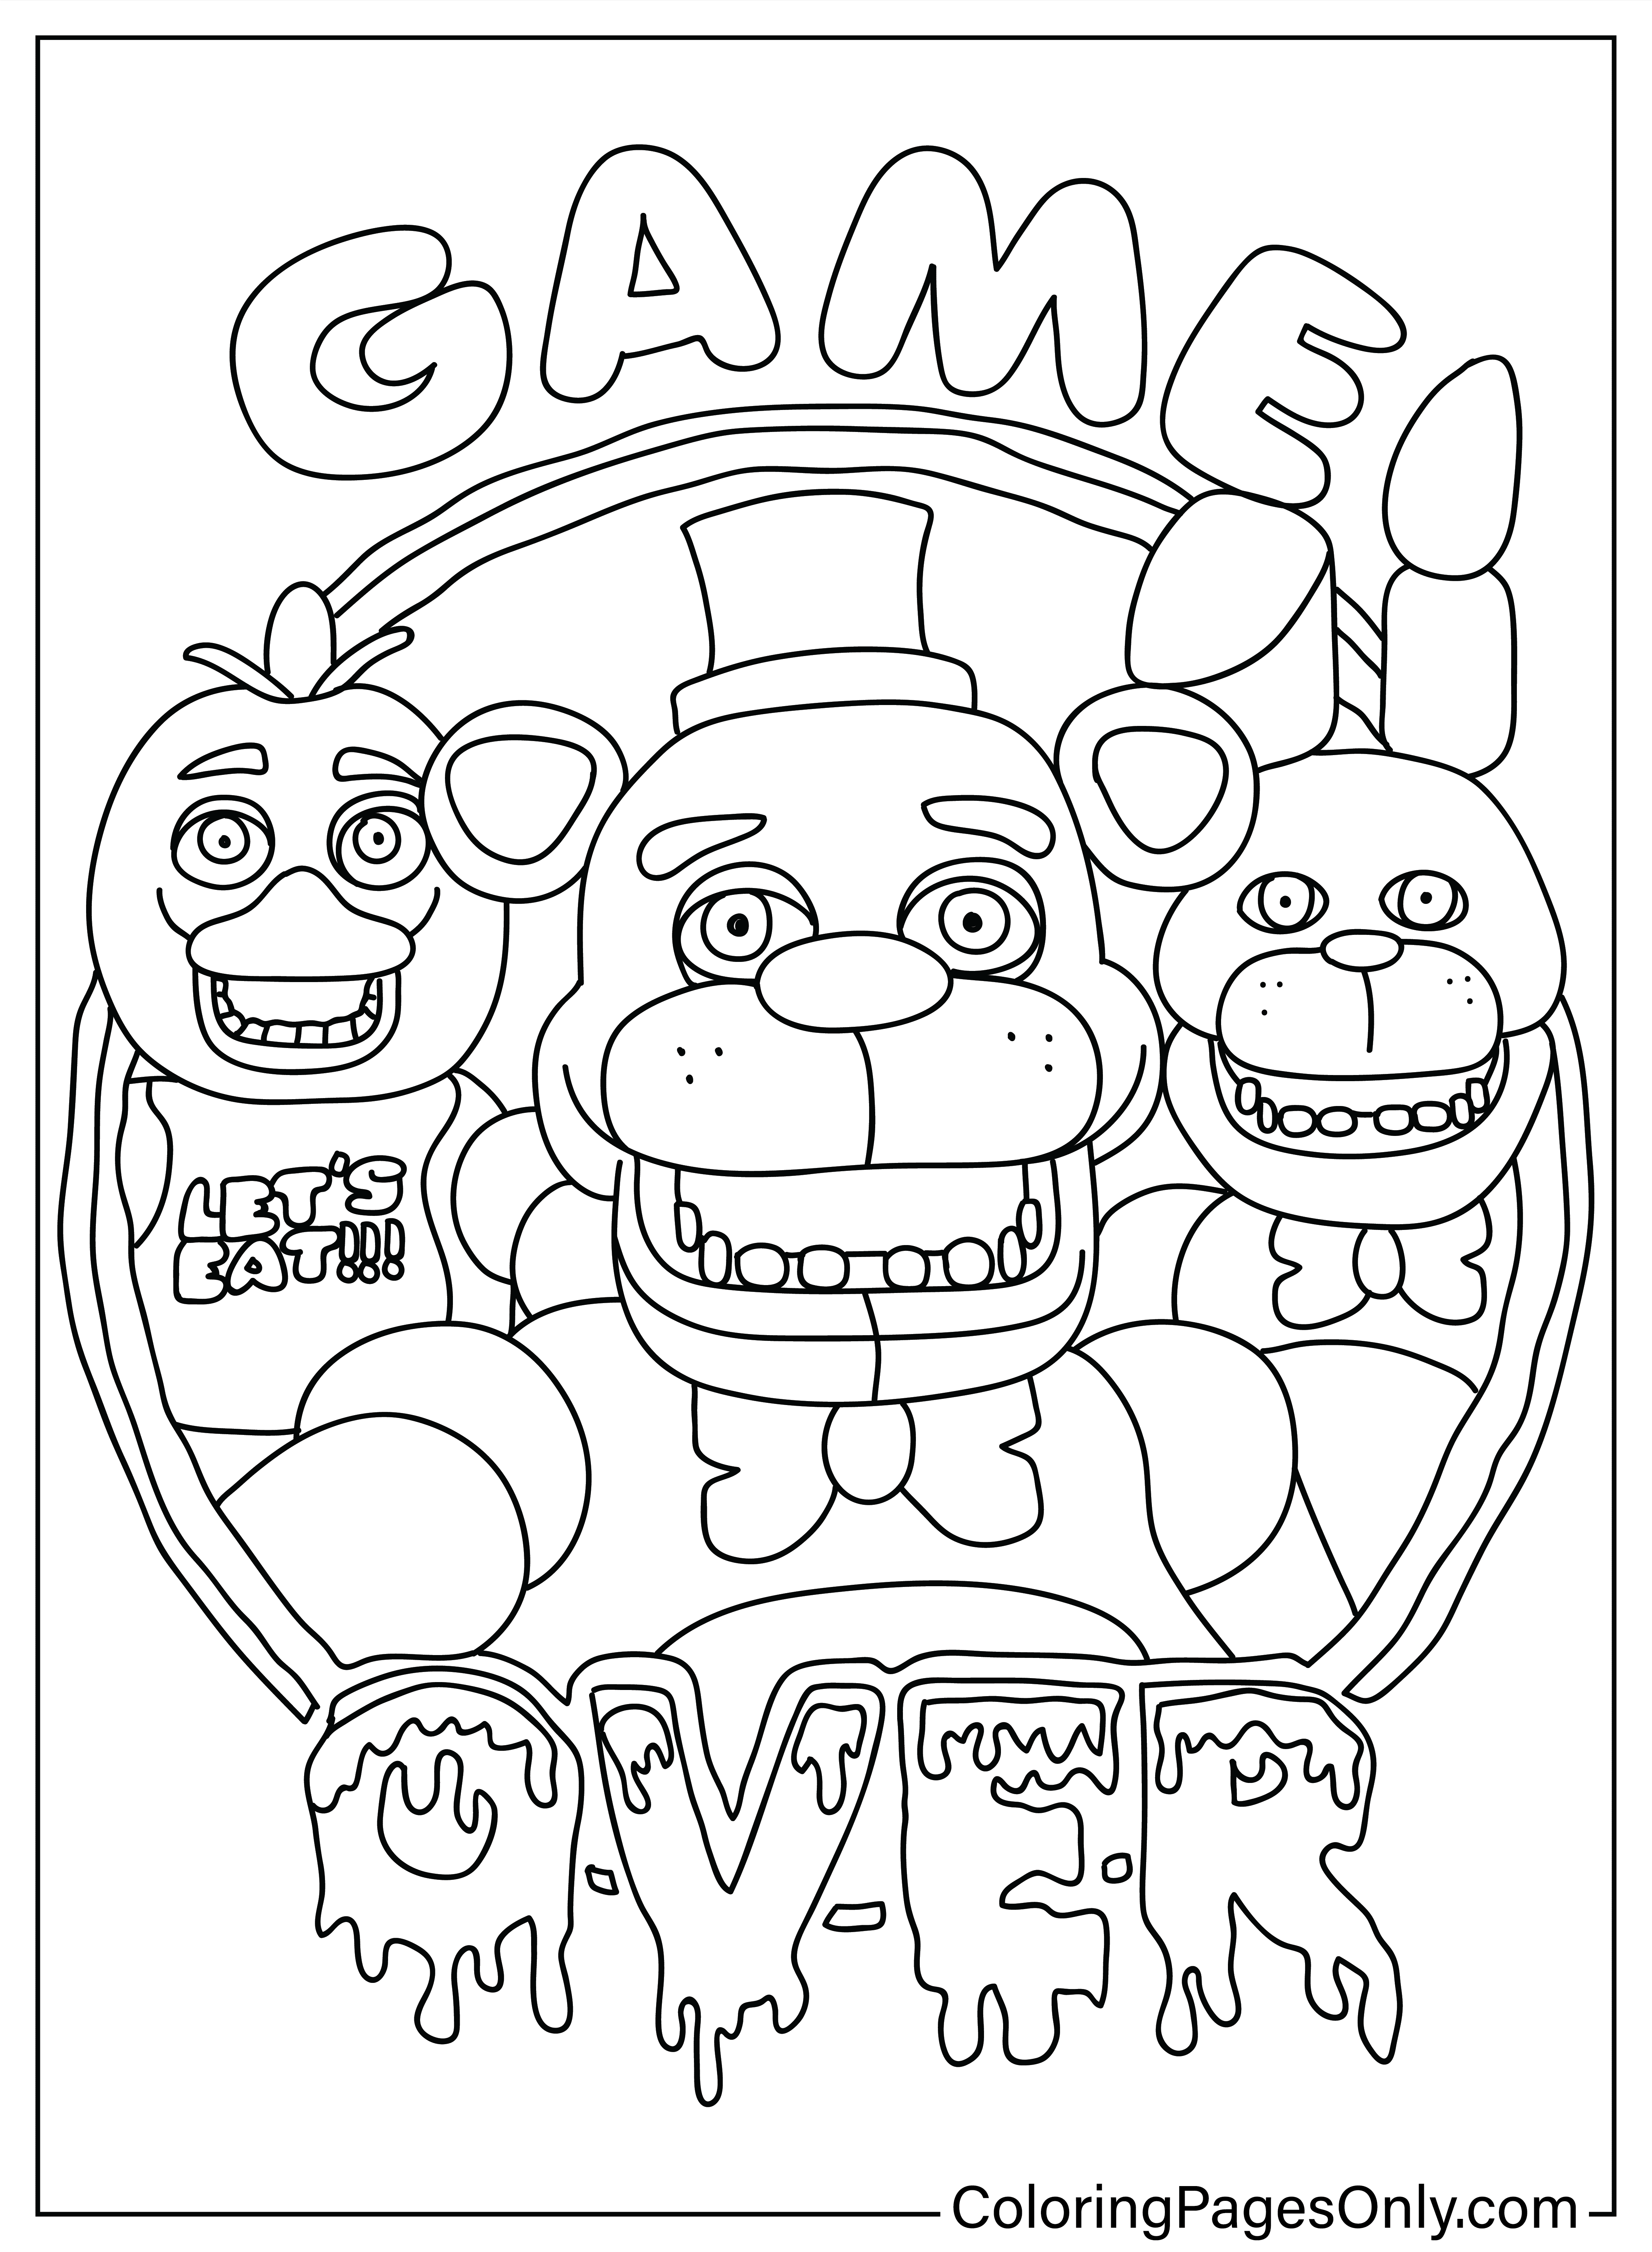 Freddy Fazbear and Friends Coloring Page